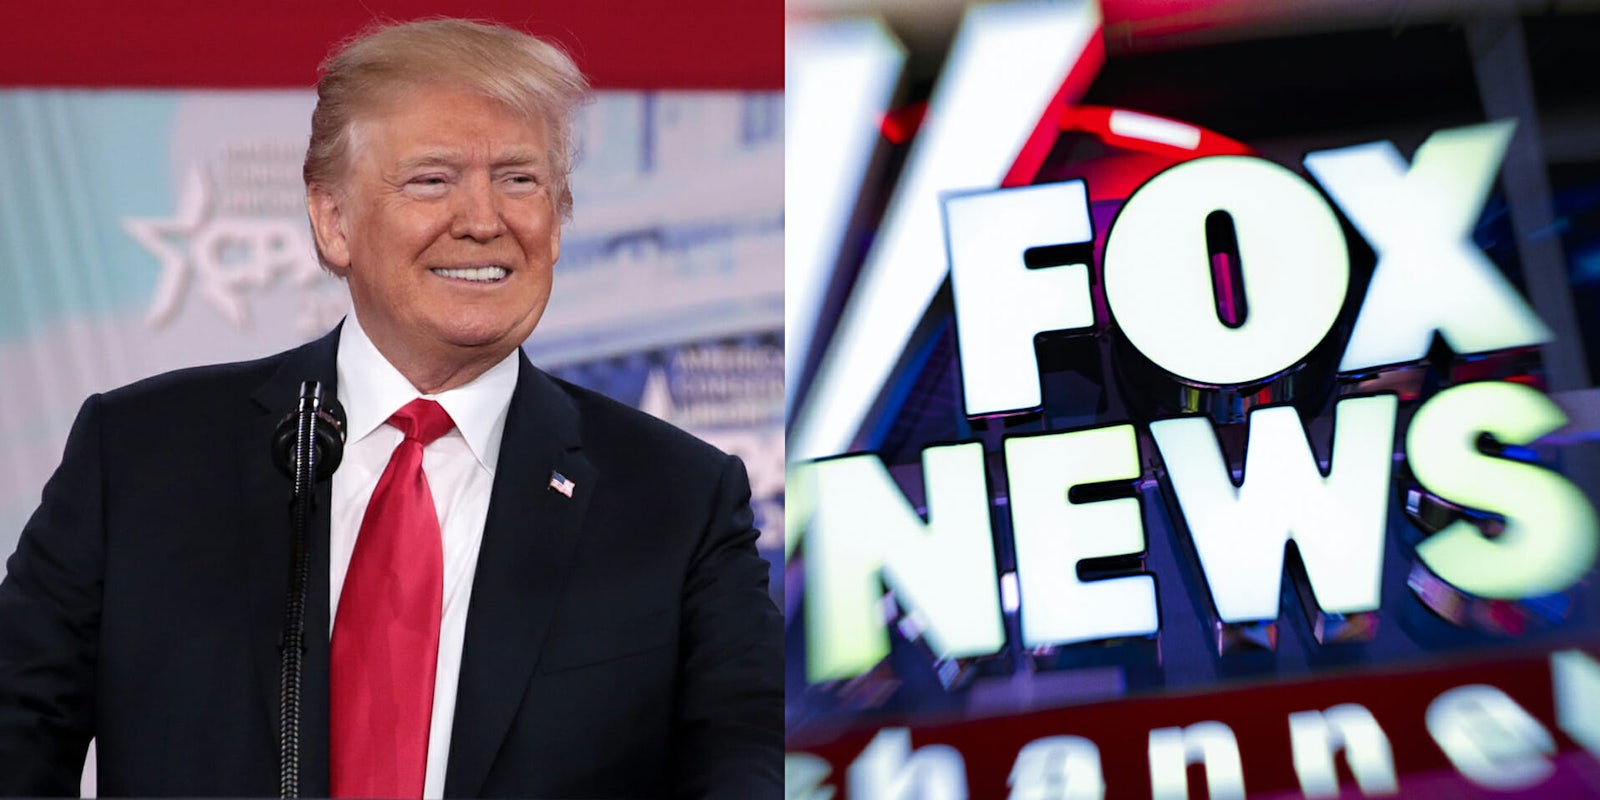 A clip put together by CNN's 'Reliable Sources' shows just how much President Donald Trump repeats talking points said by Fox News hosts such as Sean Hannity and Tucker Carlson.